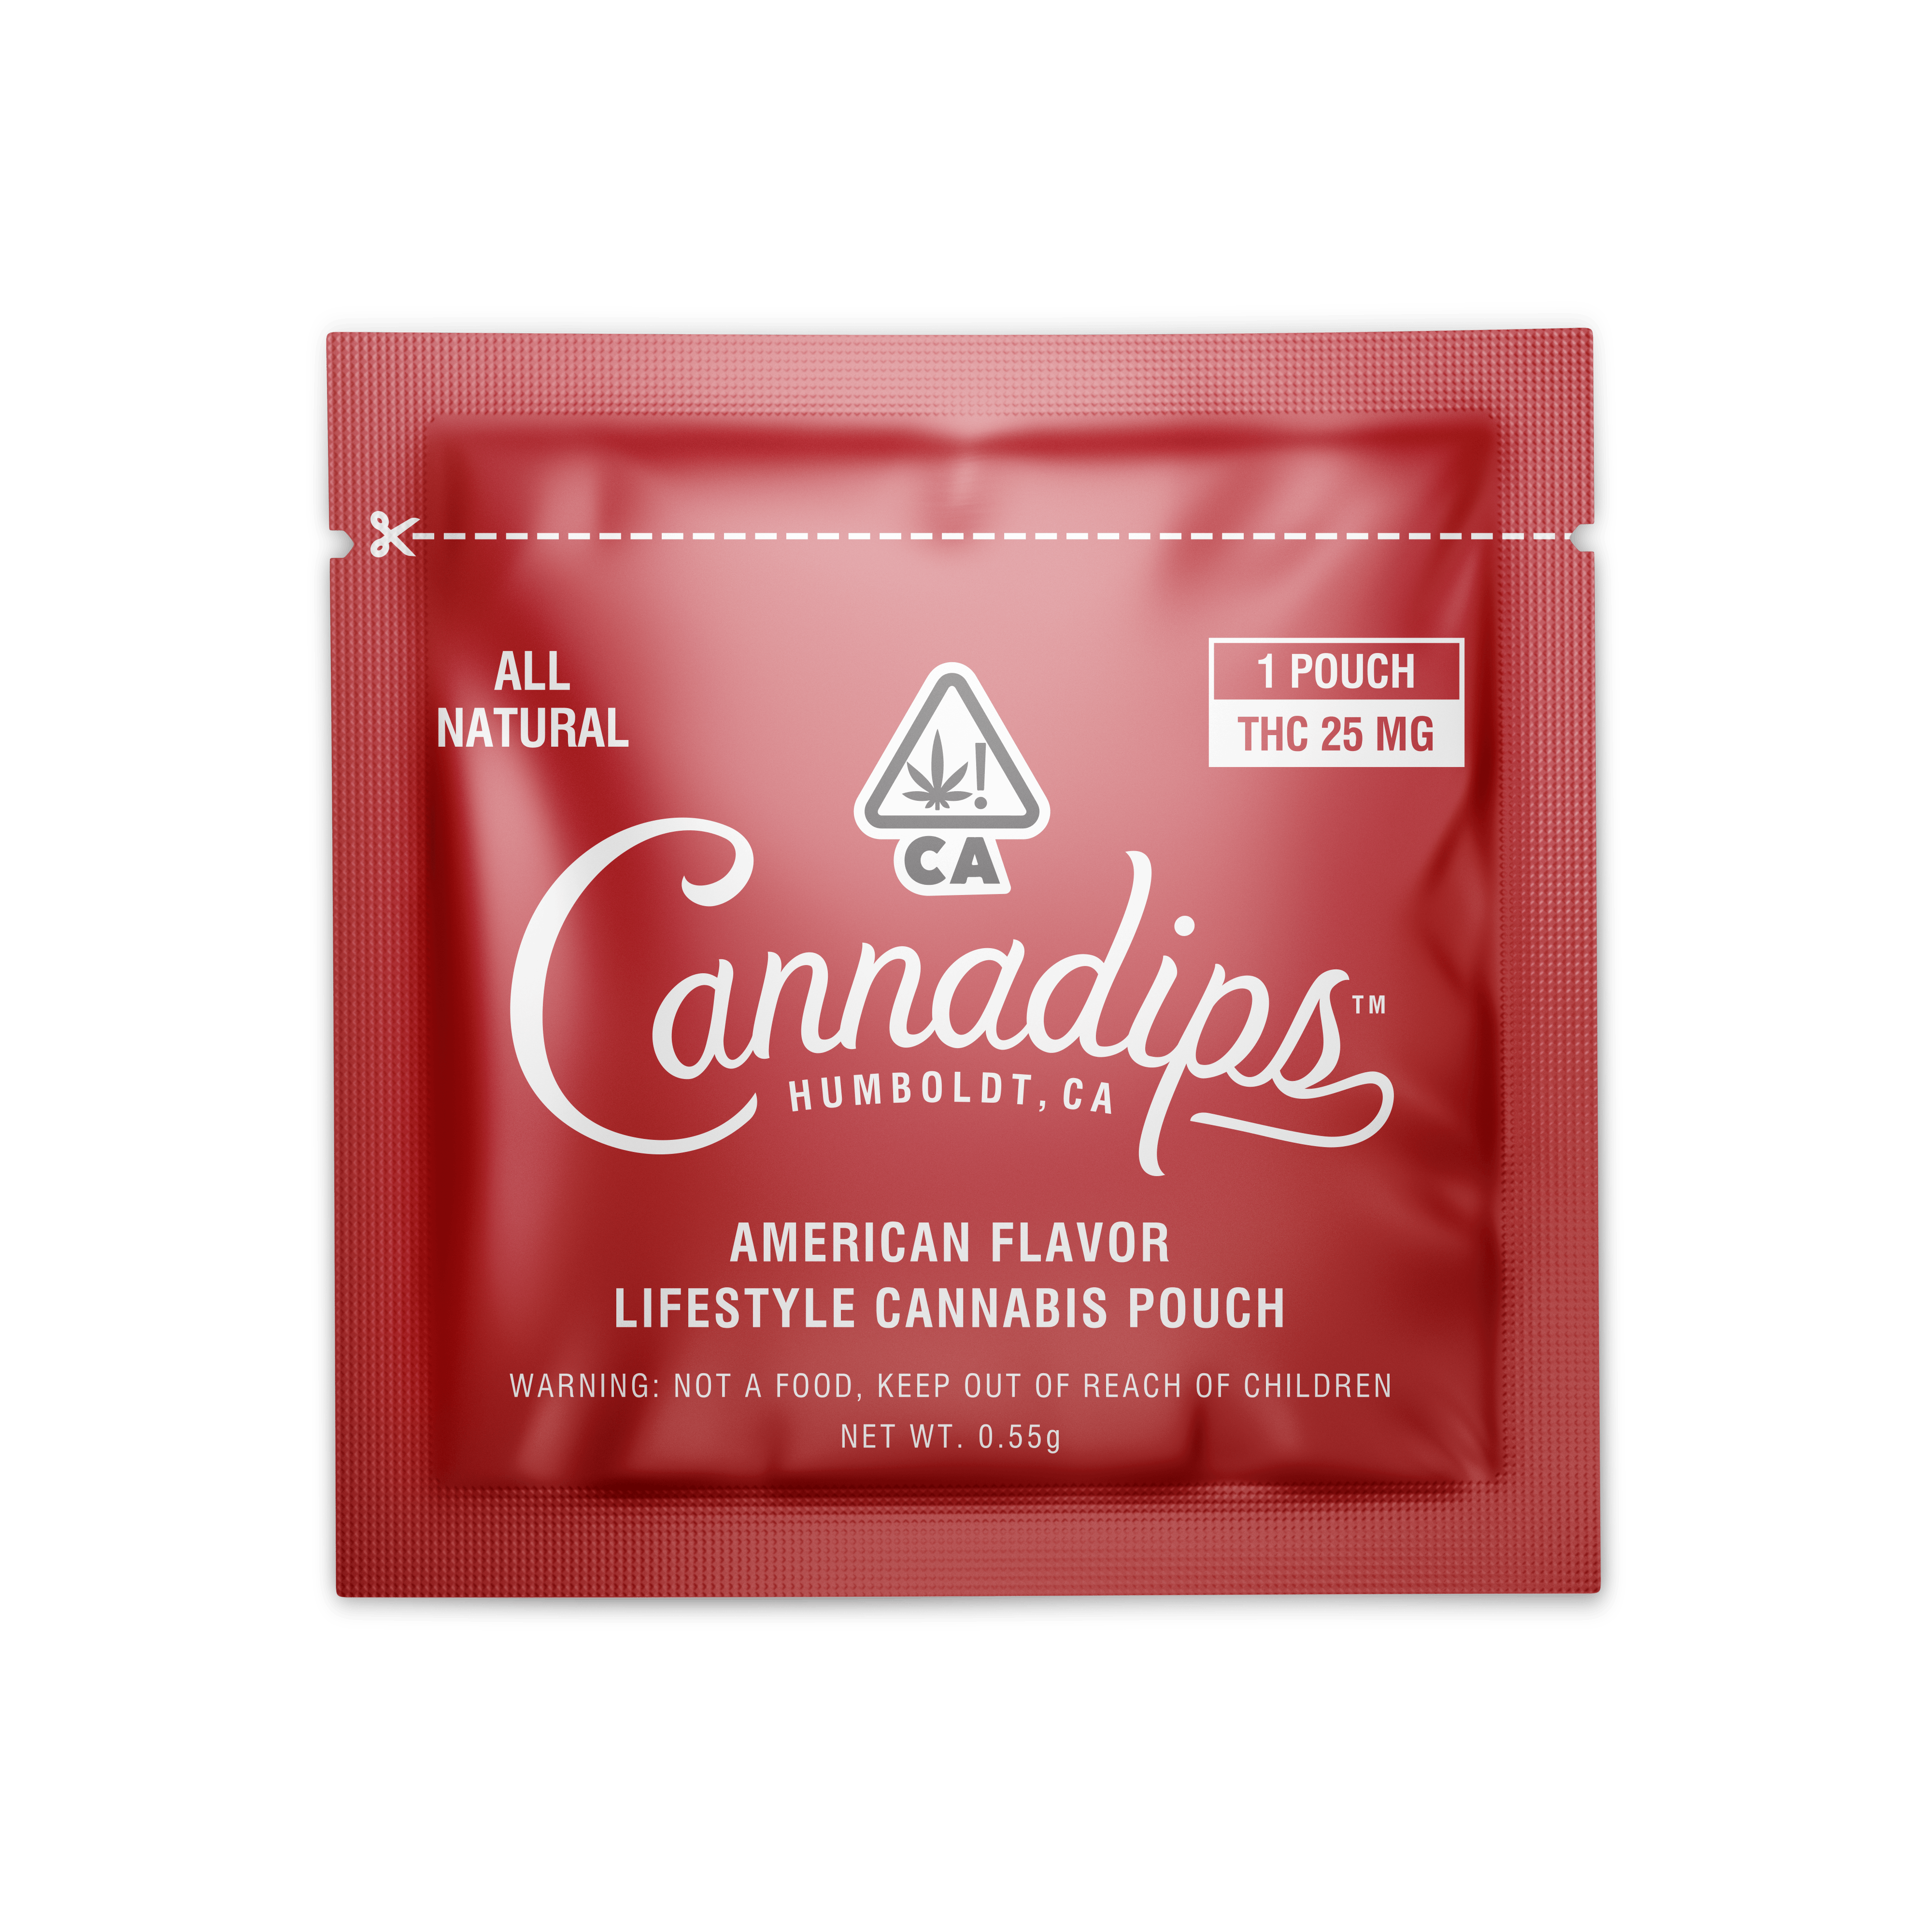 marijuana-dispensaries-vallejo-holistic-health-center-vhhc-in-vallejo-cannadips-american-pouches-thc-2c-high-dose-single